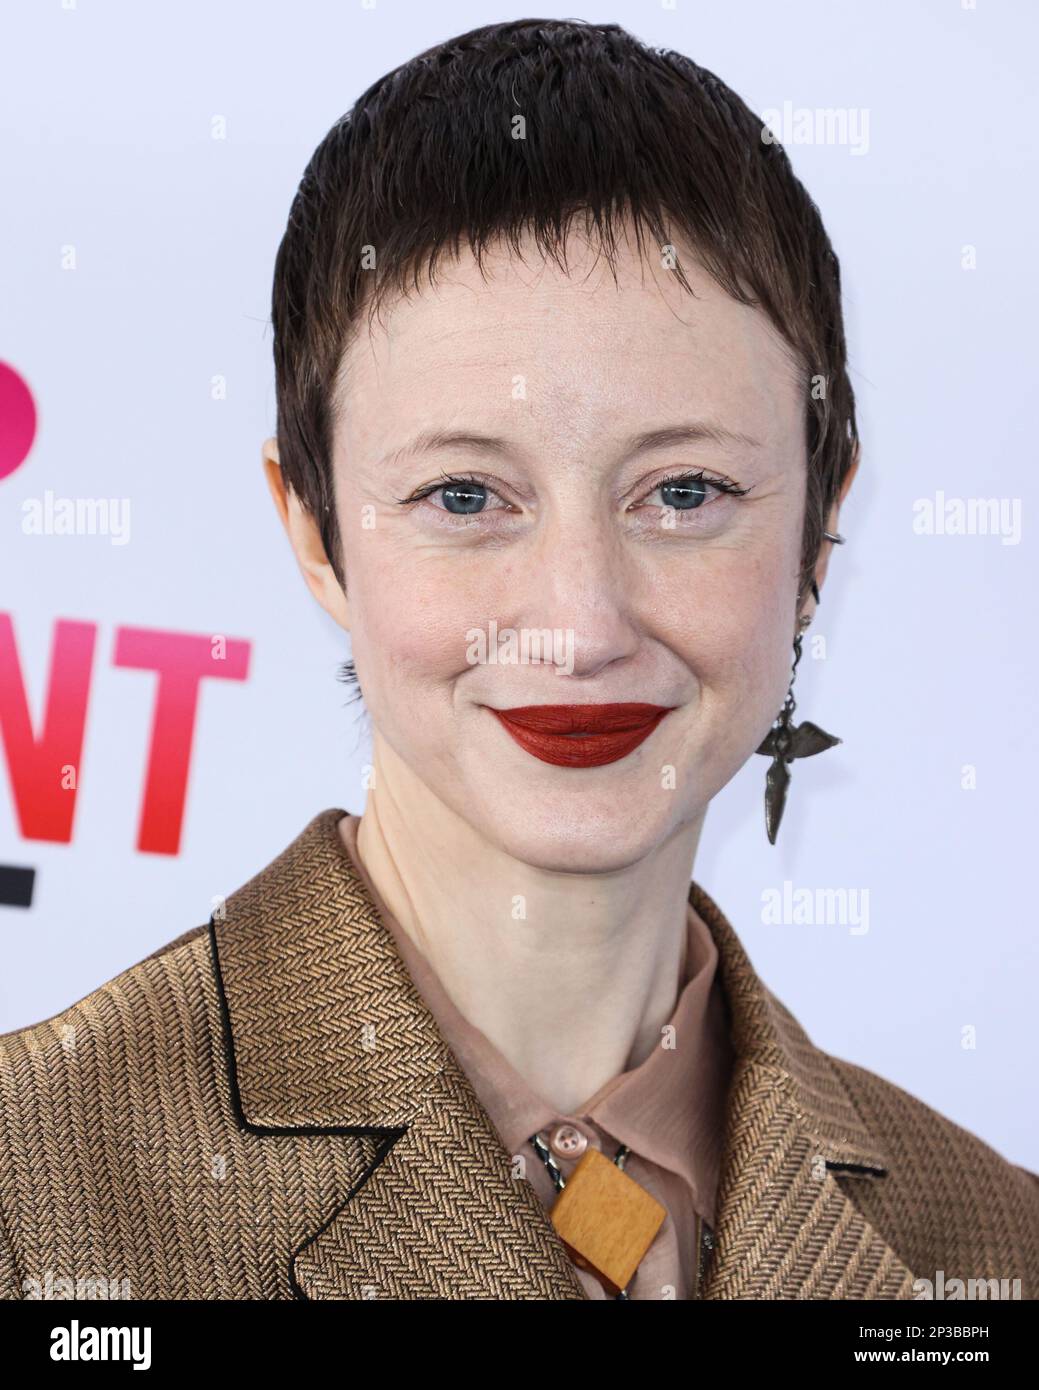 SANTA MONICA, LOS ANGELES, CALIFORNIA, USA - MARCH 04: Andrea Riseborough arrives at the 2023 Film Independent Spirit Awards held at the Santa Monica Beach on March 4, 2023 in Santa Monica, Los Angeles, California, United States. (Photo by Xavier Collin/Image Press Agency) Stock Photo